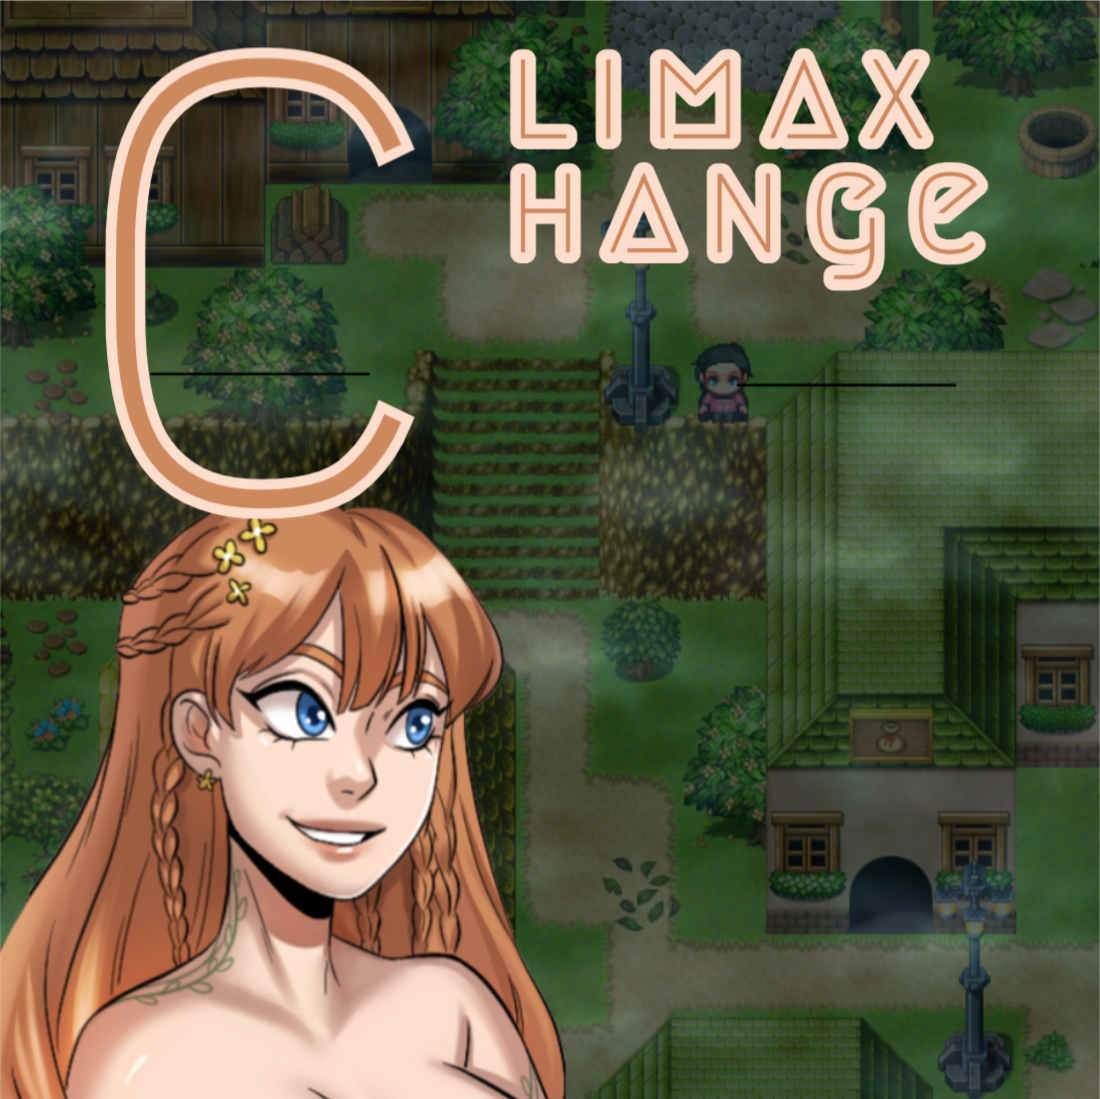 Climax Change